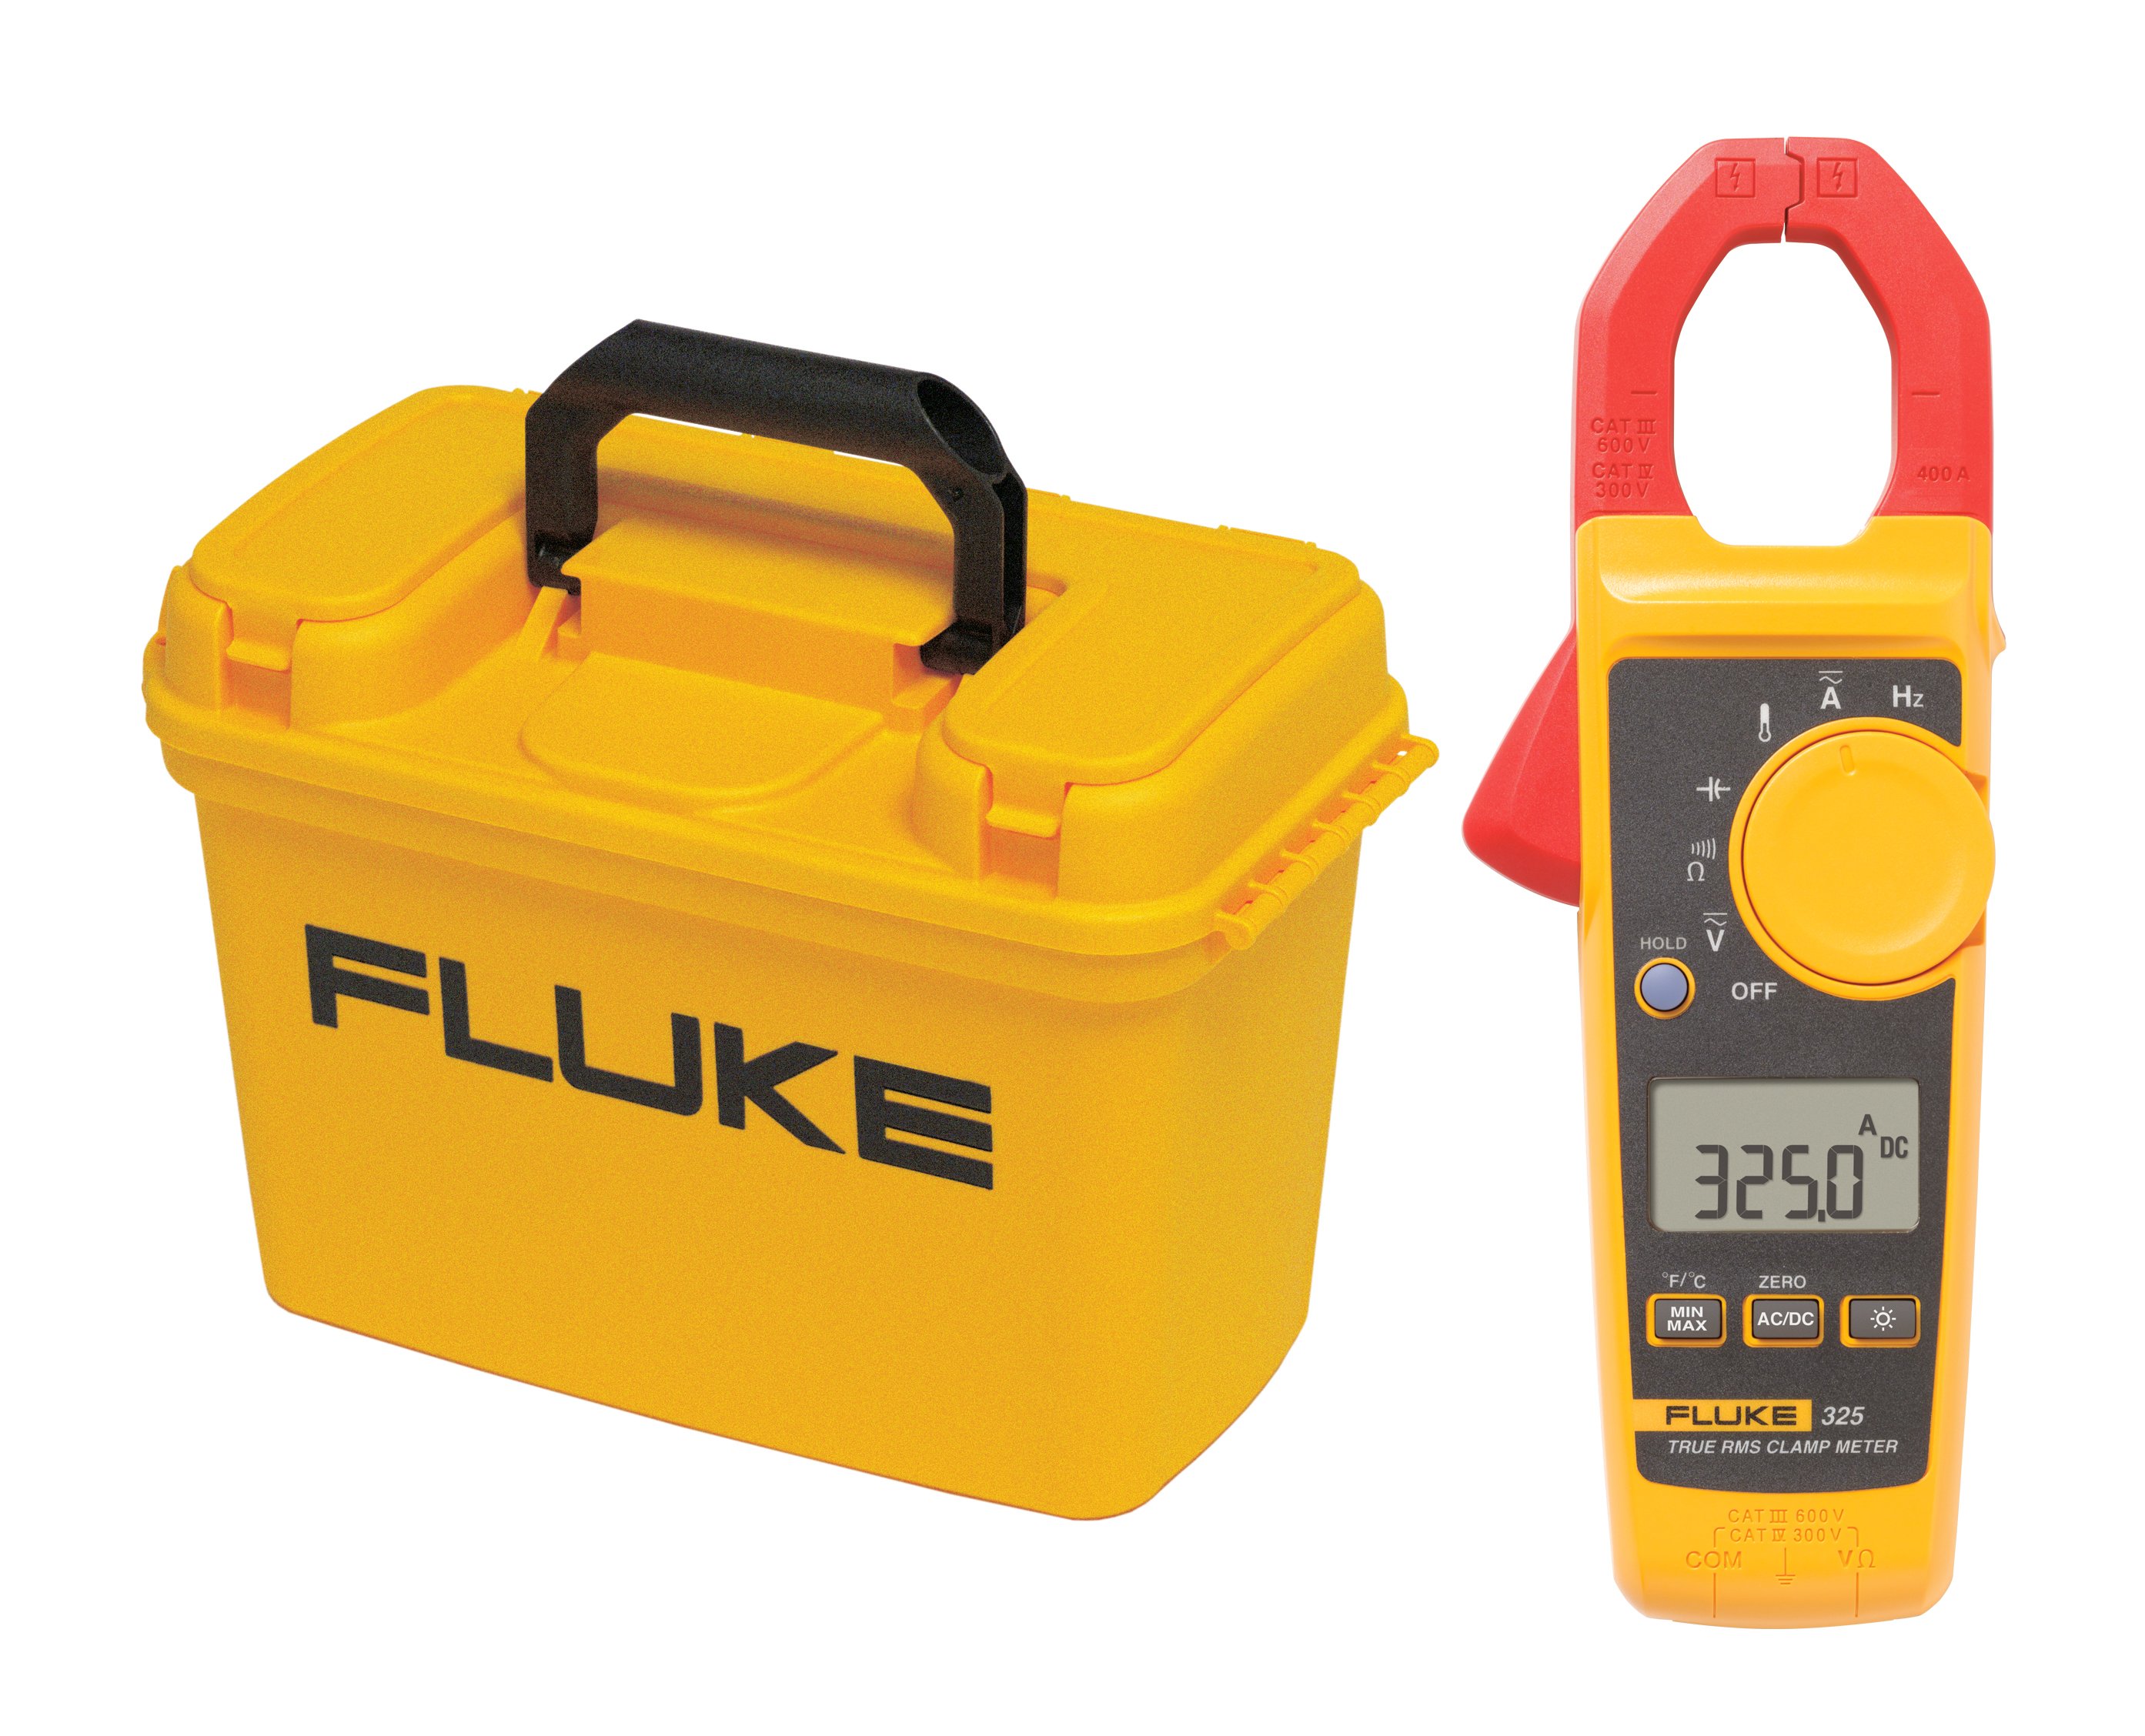 Fluke 325 True-RMS Clampmeter with a FREE C1600 heavy duty toolbox